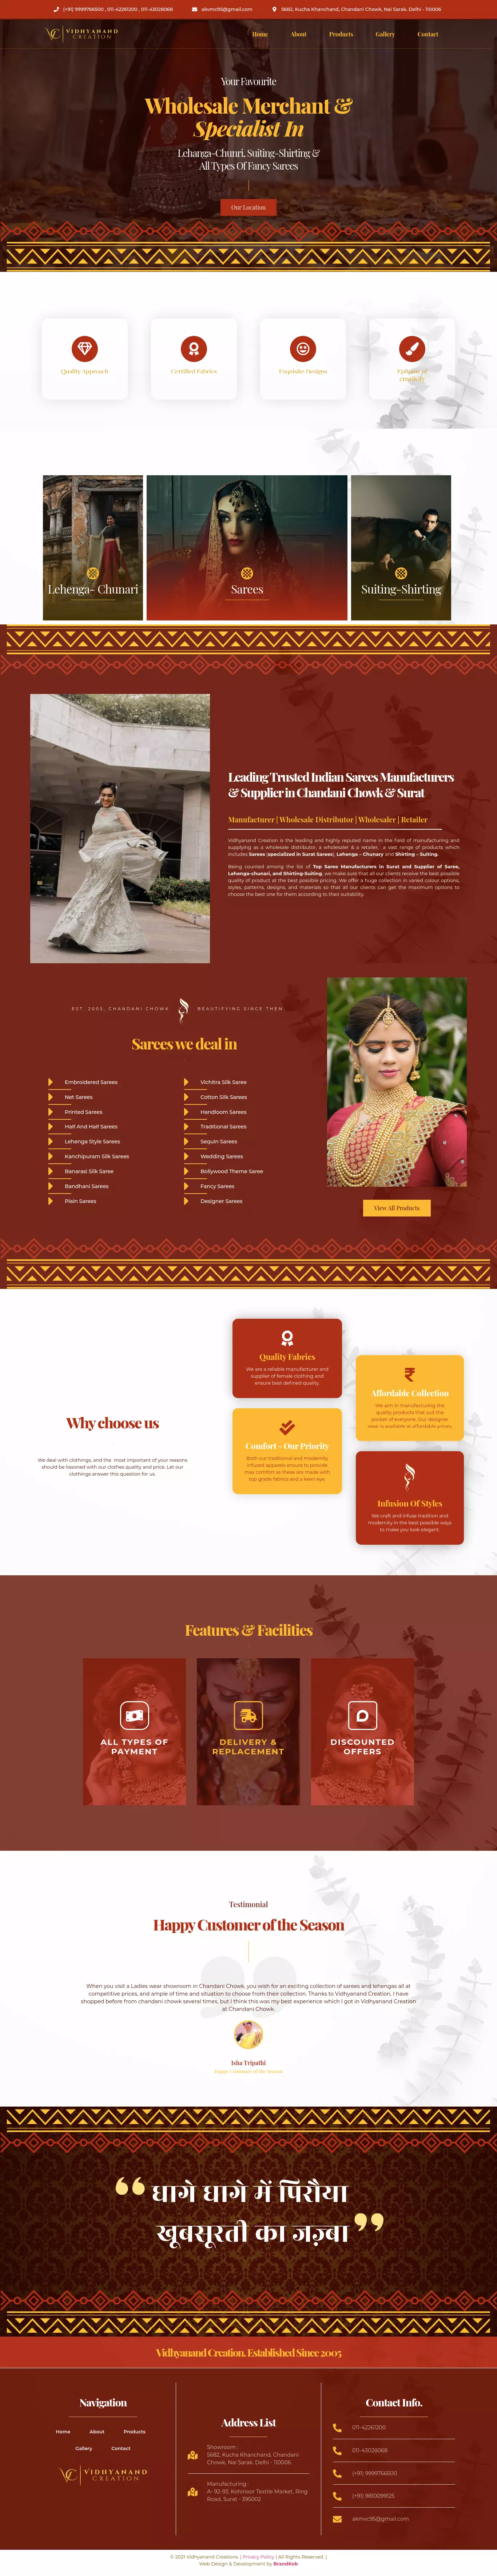 BrandKob Projects - Vidhyanand Creation Homepage